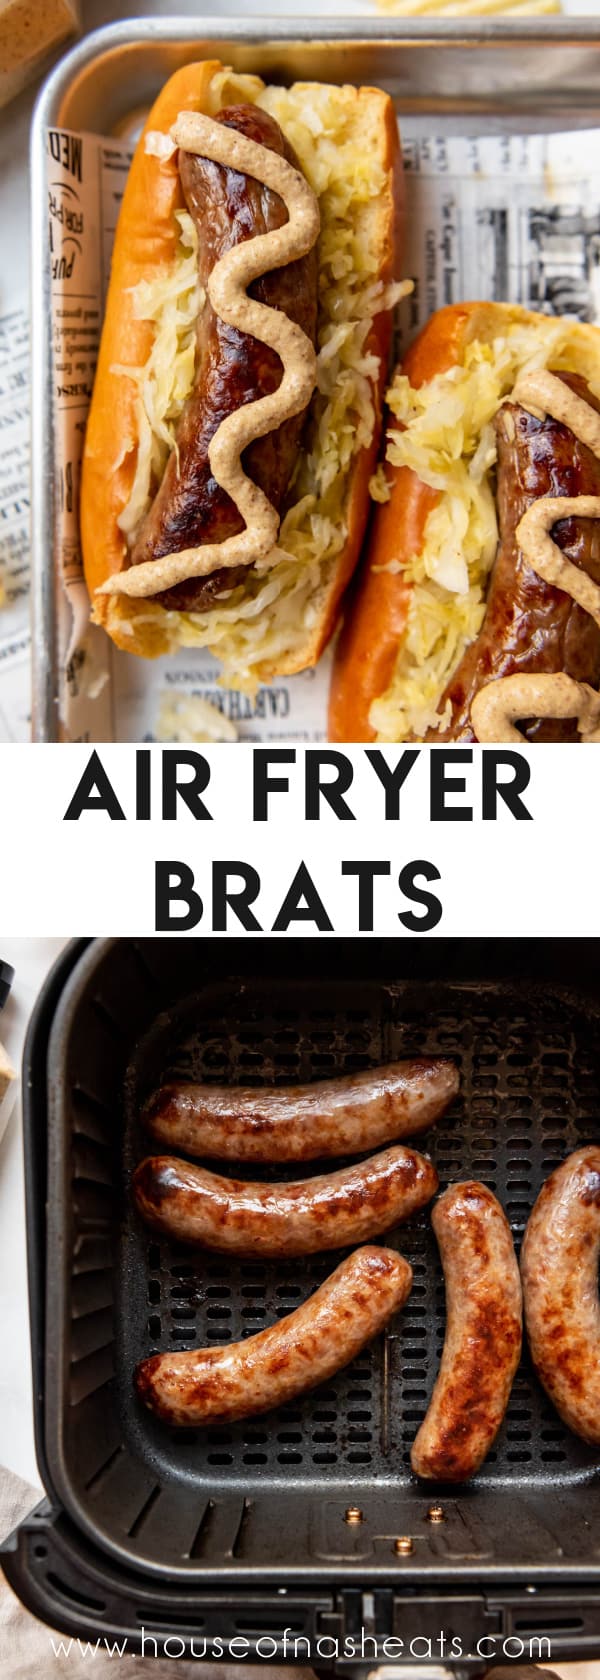 A collage of images of air fryer brats with text overlay.